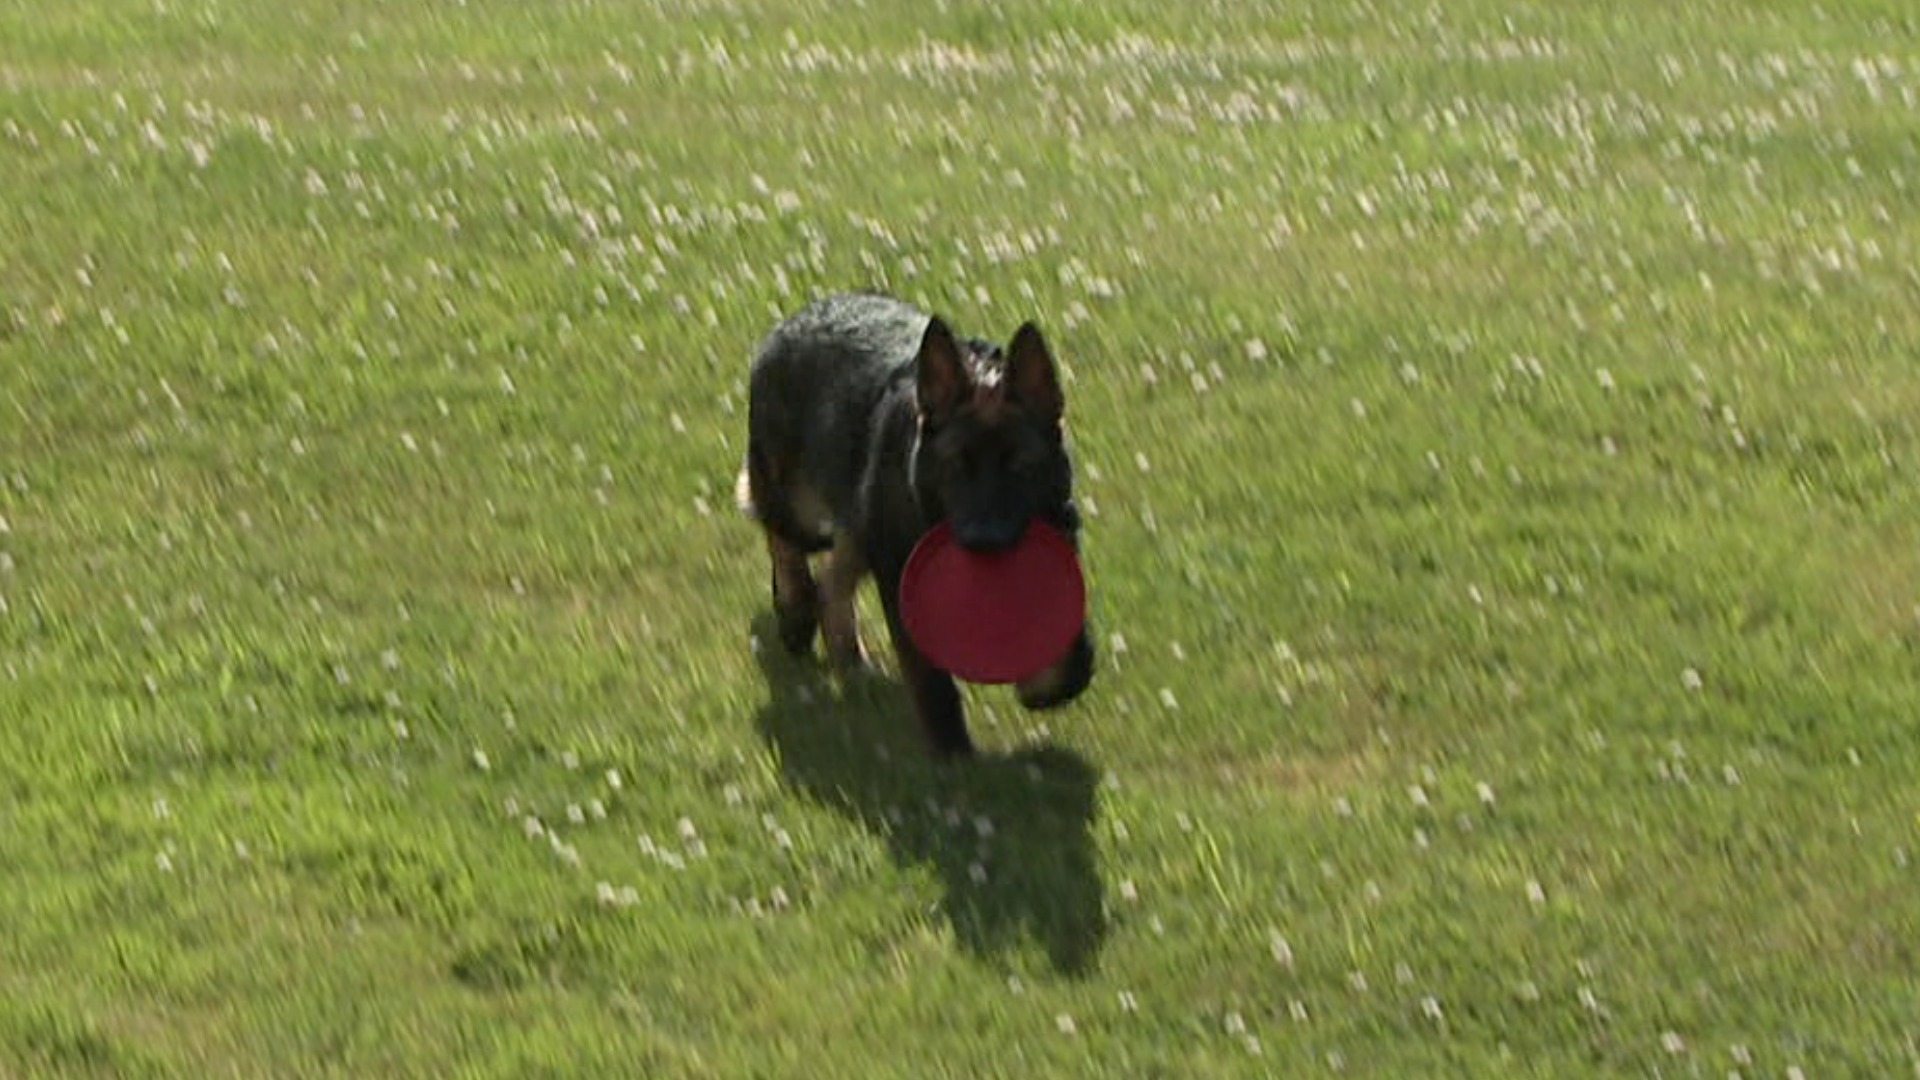 The German Shepherd is being trained to do drug-sniffing searches, helping staff at Geisinger Marworth.